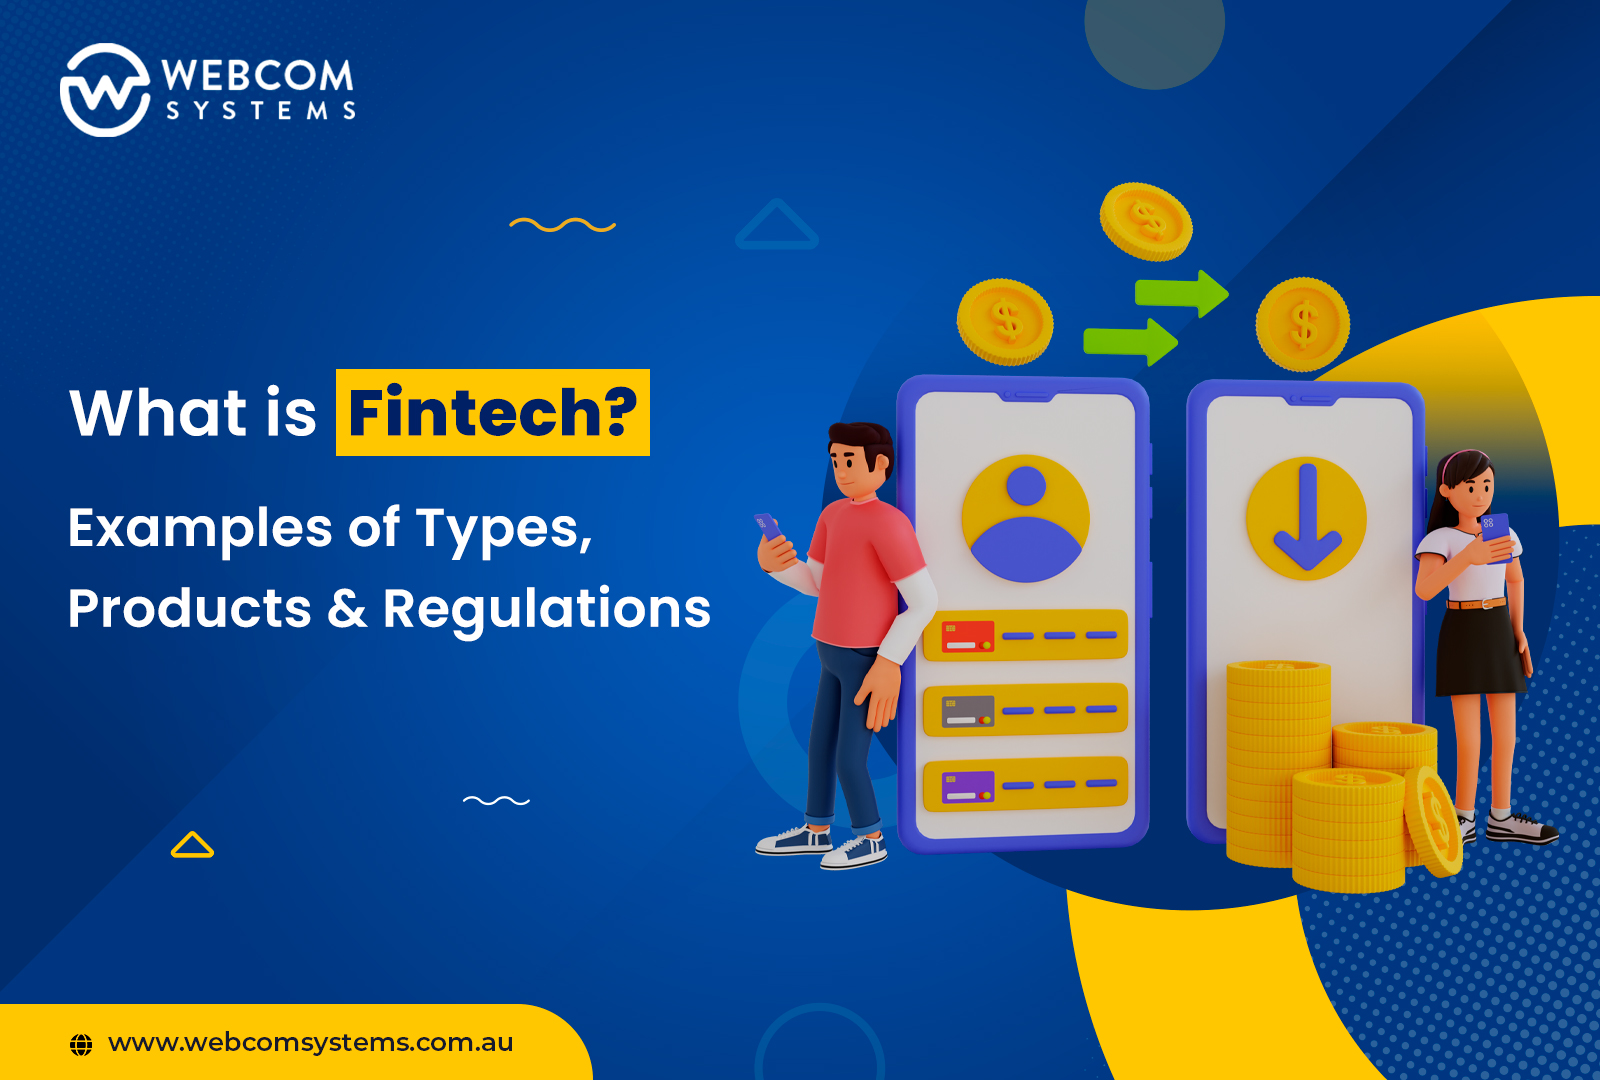 What is Fintech? Examples of Types, Products & Regulations